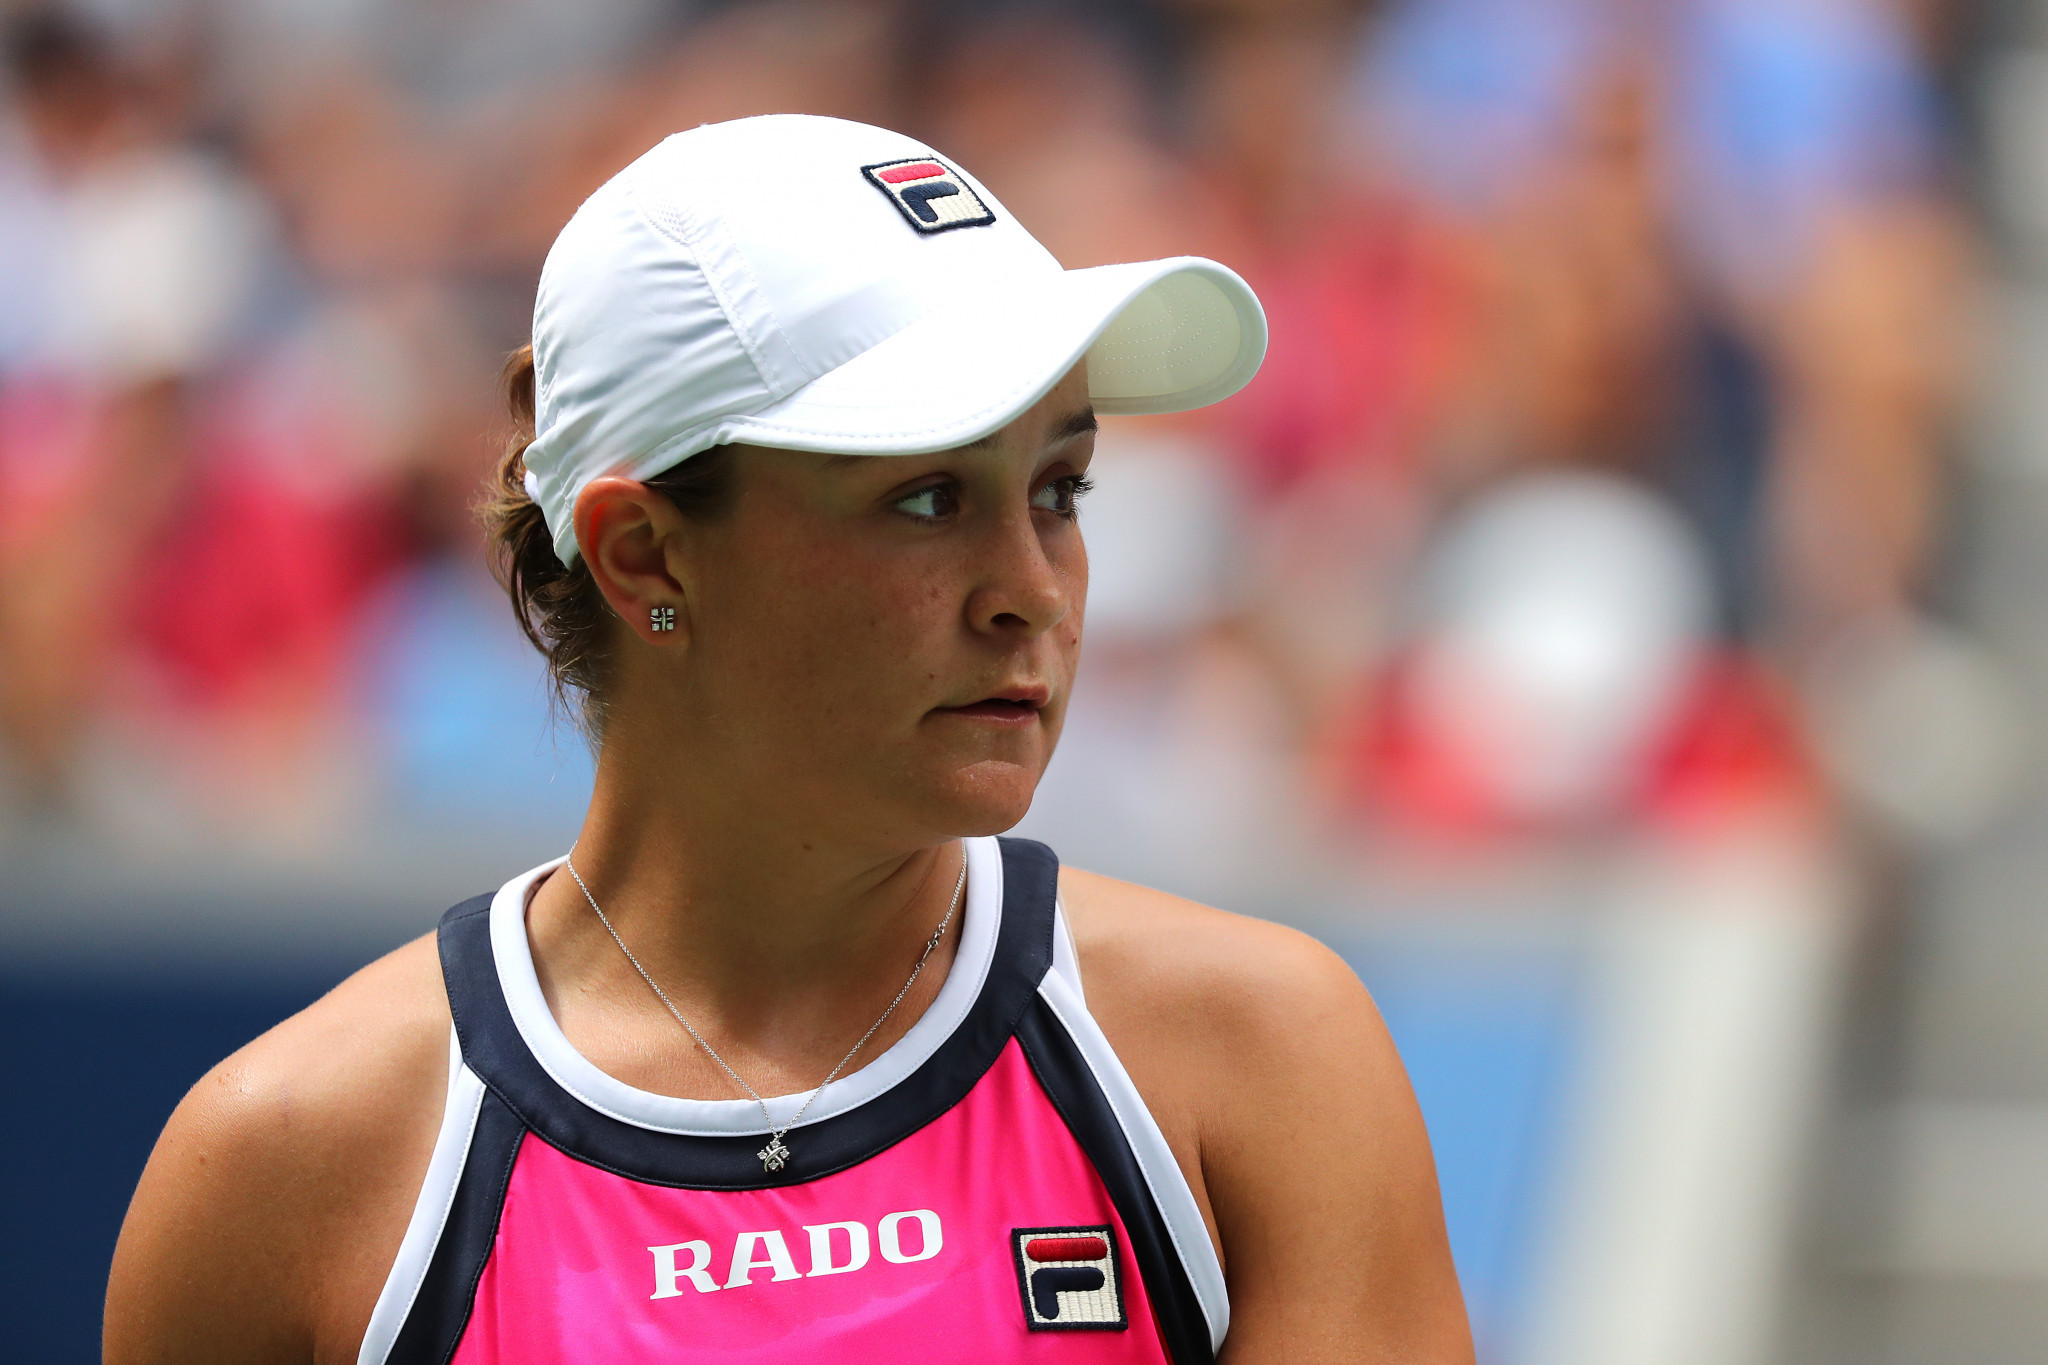 Australia's world number one Ashleigh Barty has announced she will miss this year's US Open because of fears over coronavirus ©Getty Images